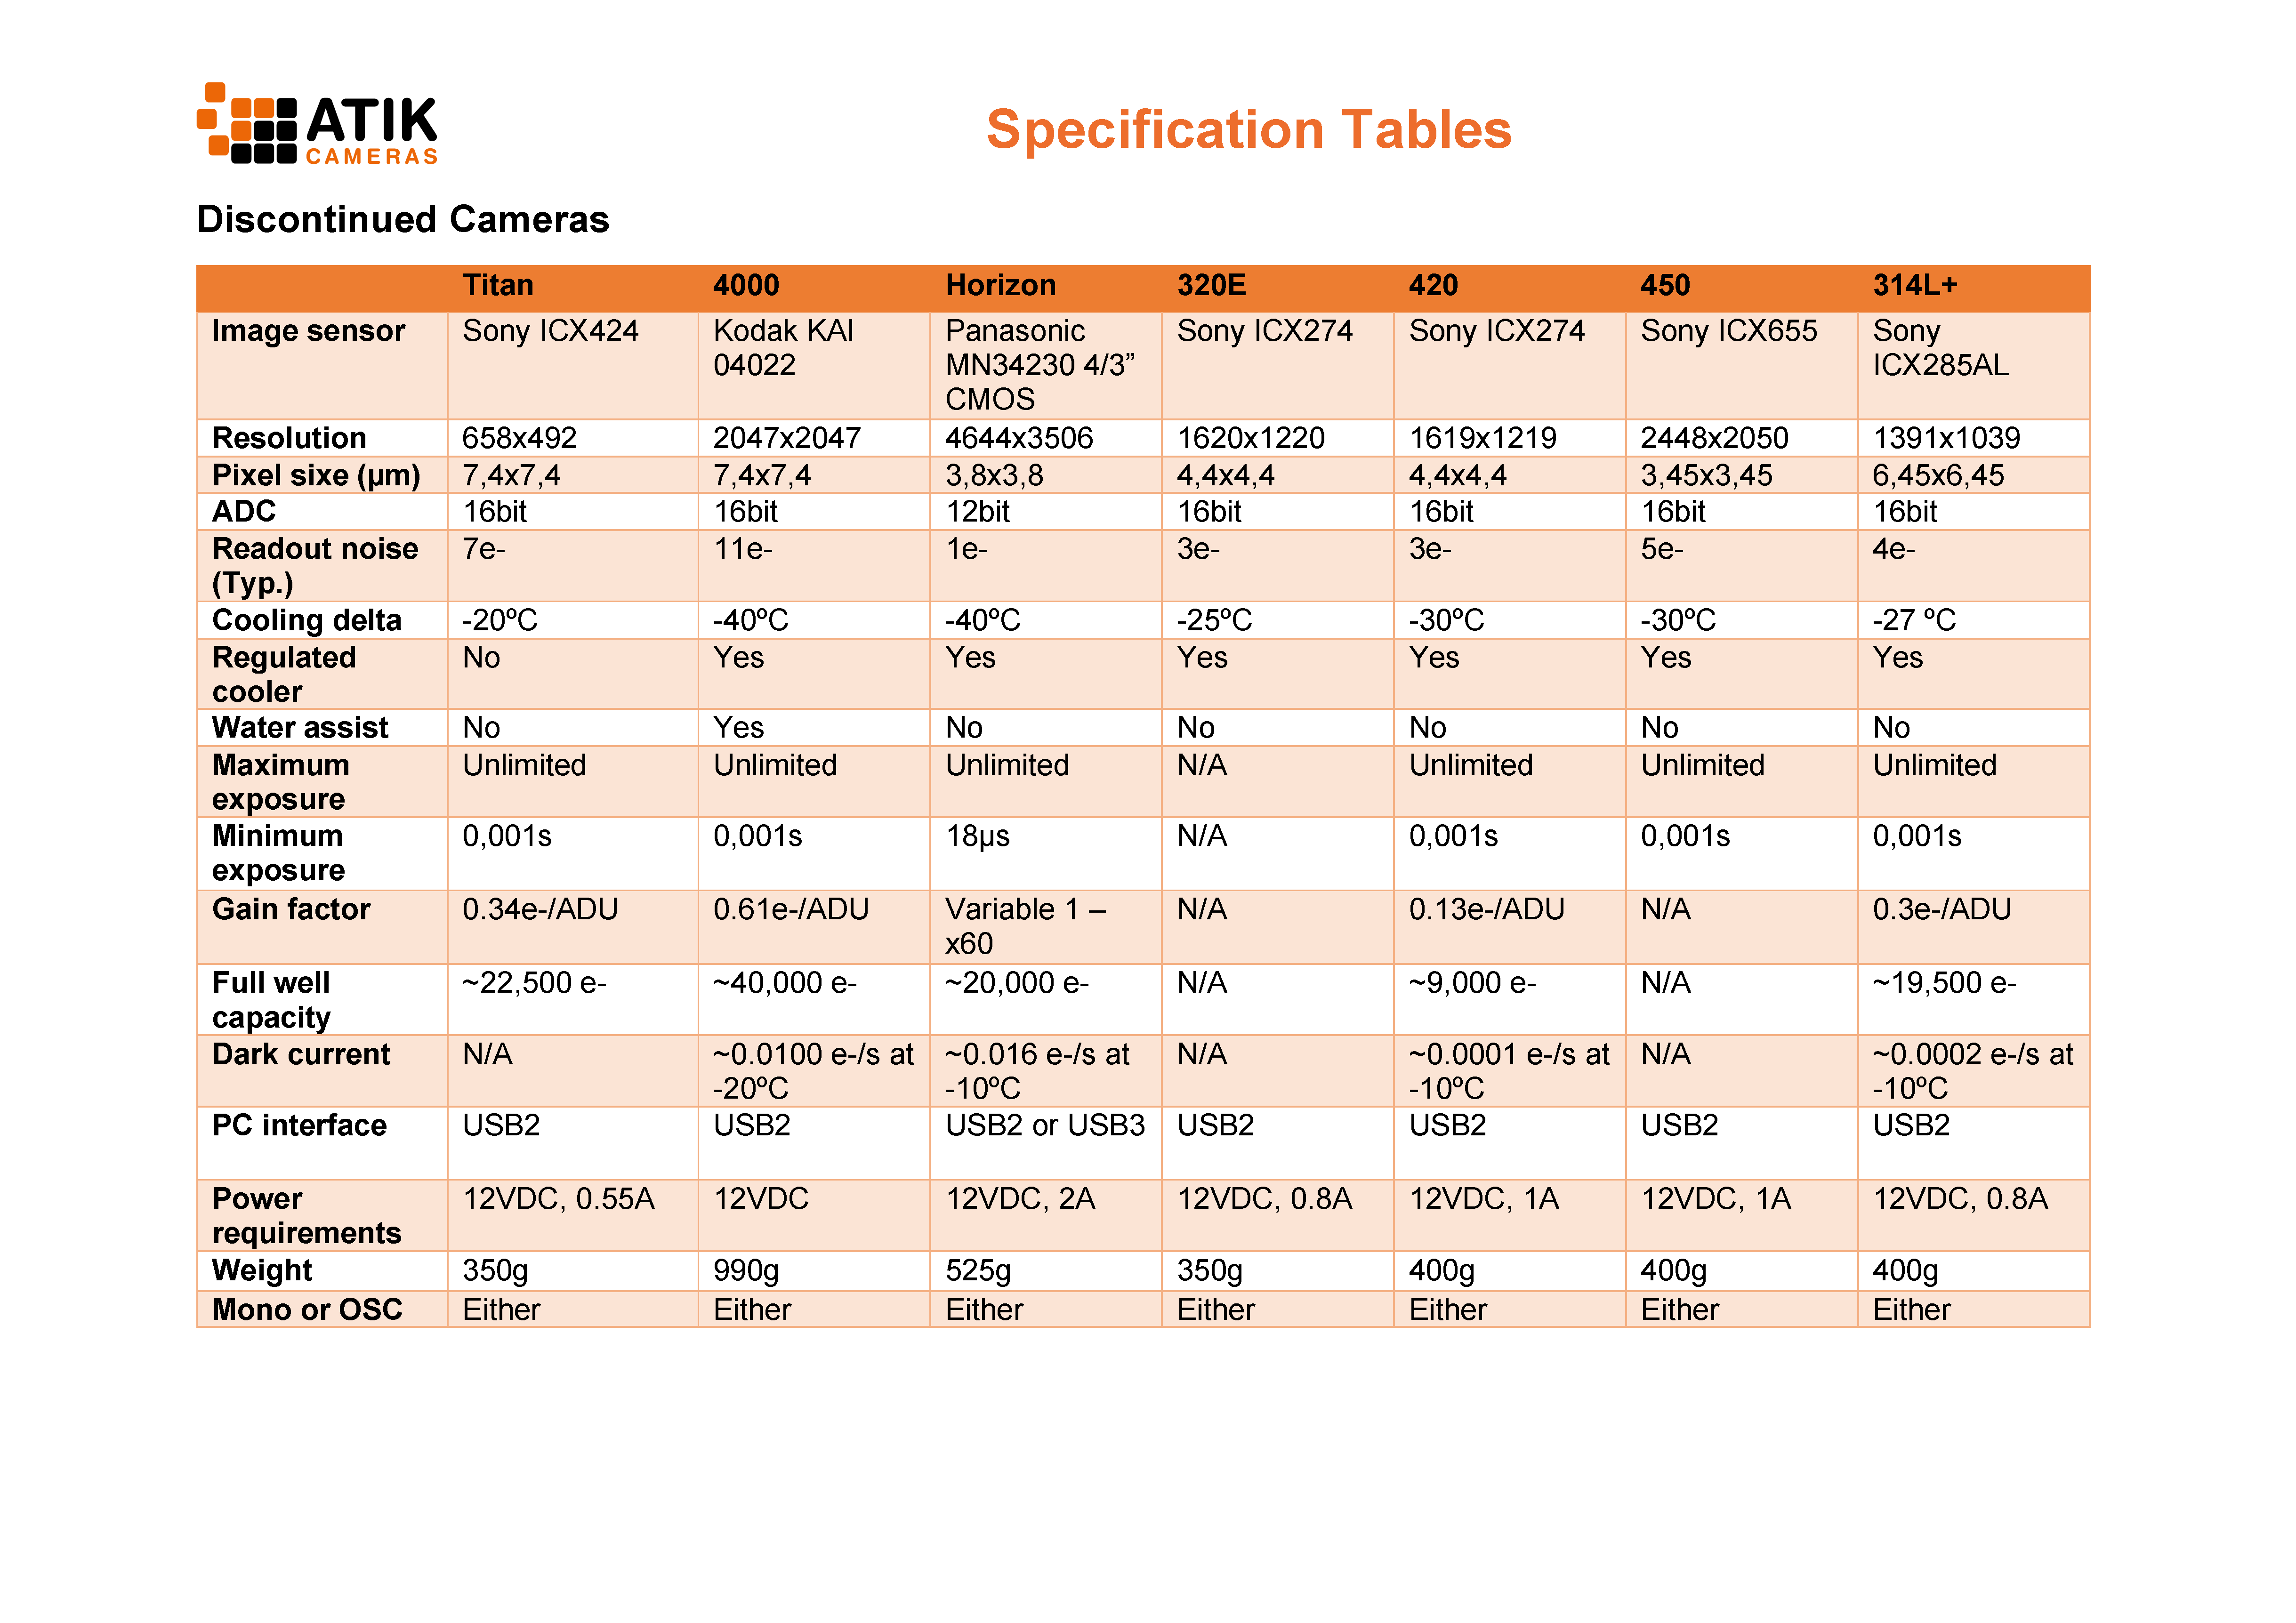 Sample Specification Tables